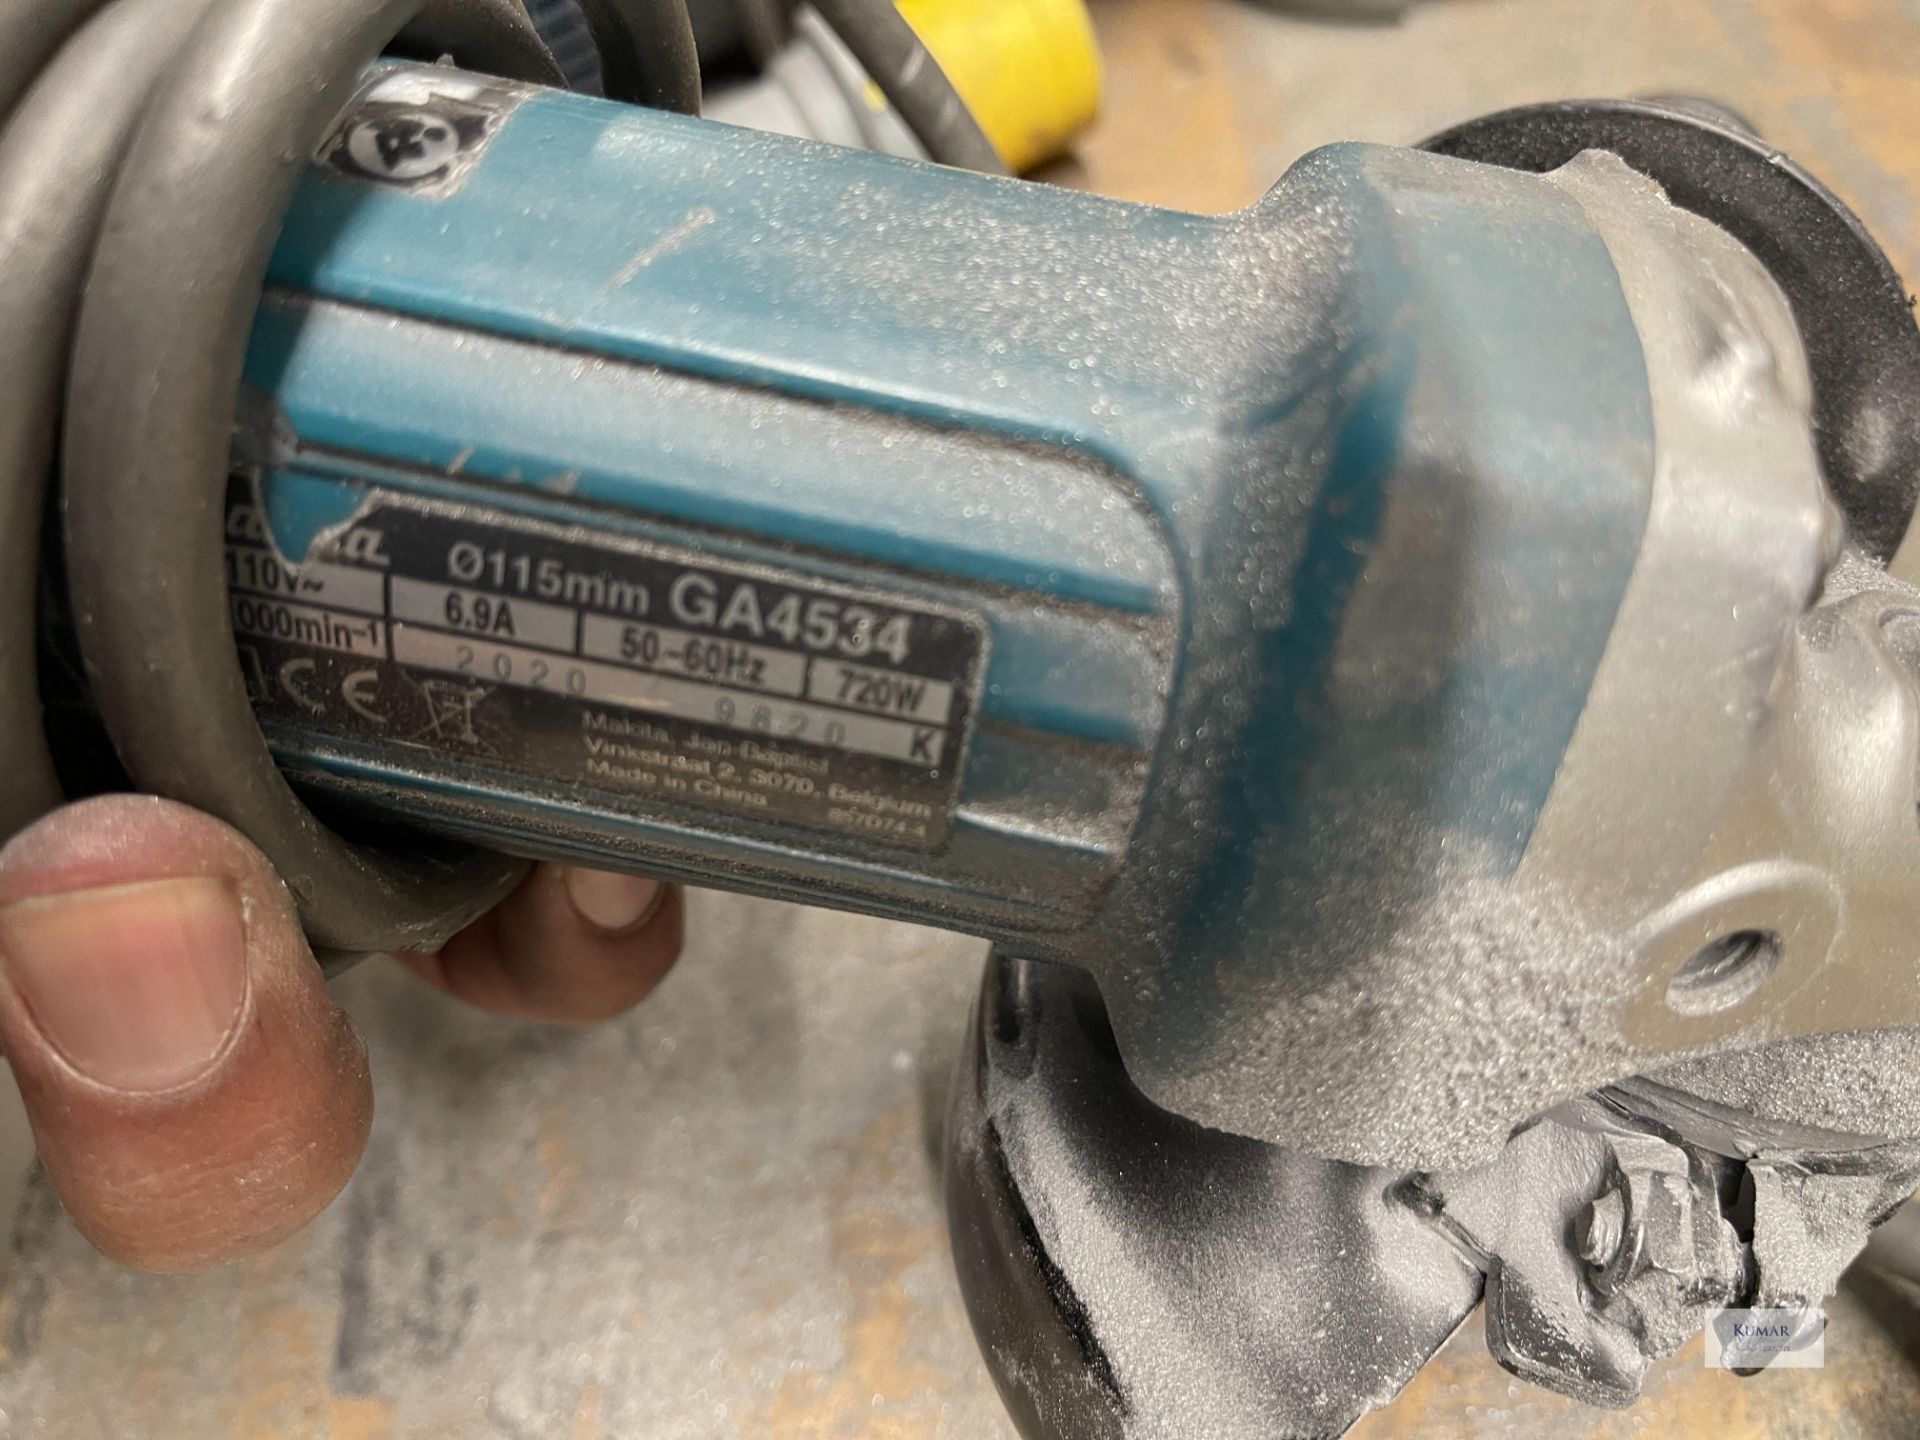 Bosch Professional GWS-115s 110v Corded Angle Grinder & Makita GA4534 110v Corded Angle Grinder ( - Image 5 of 6